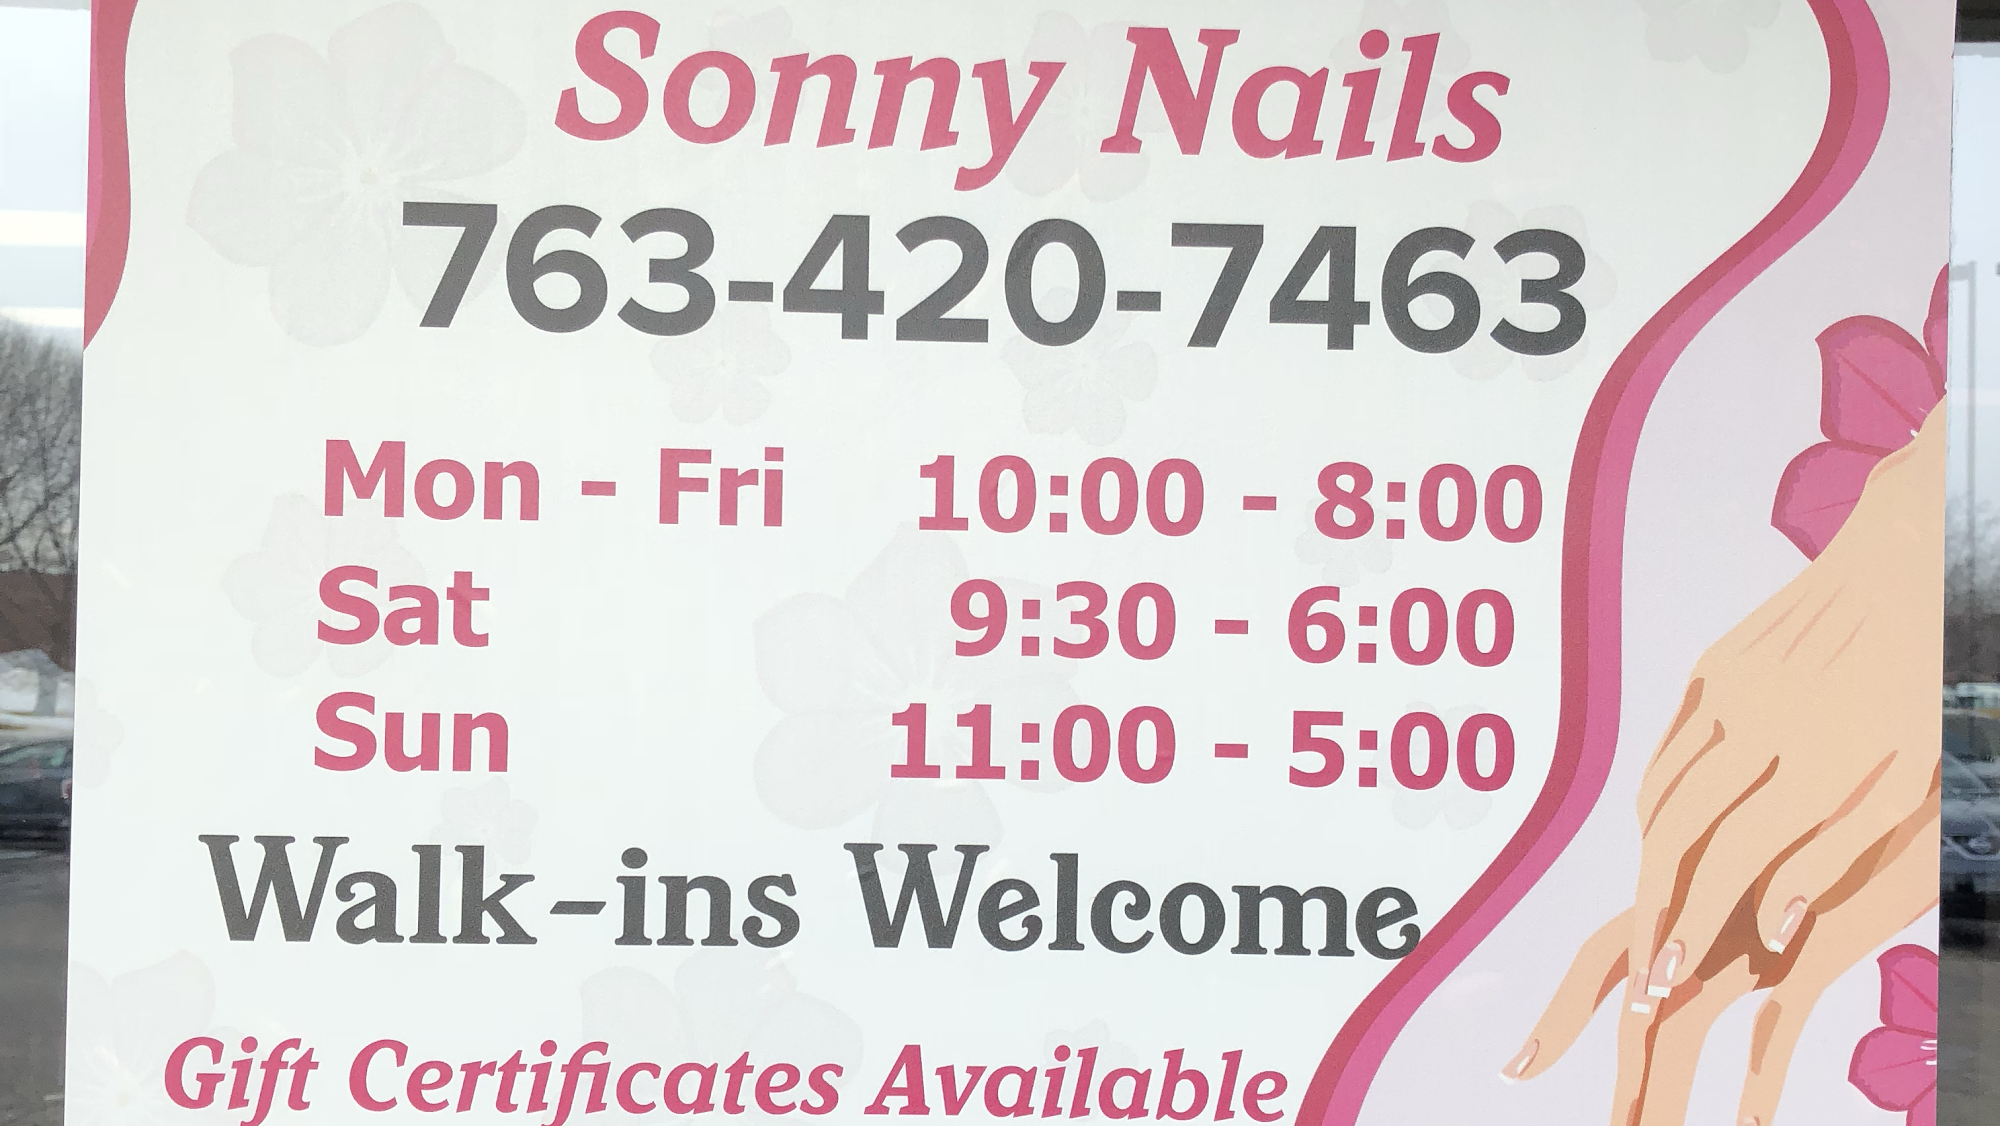 Sonny Nails (located by Batteries Plus, Domino’s Pizza)